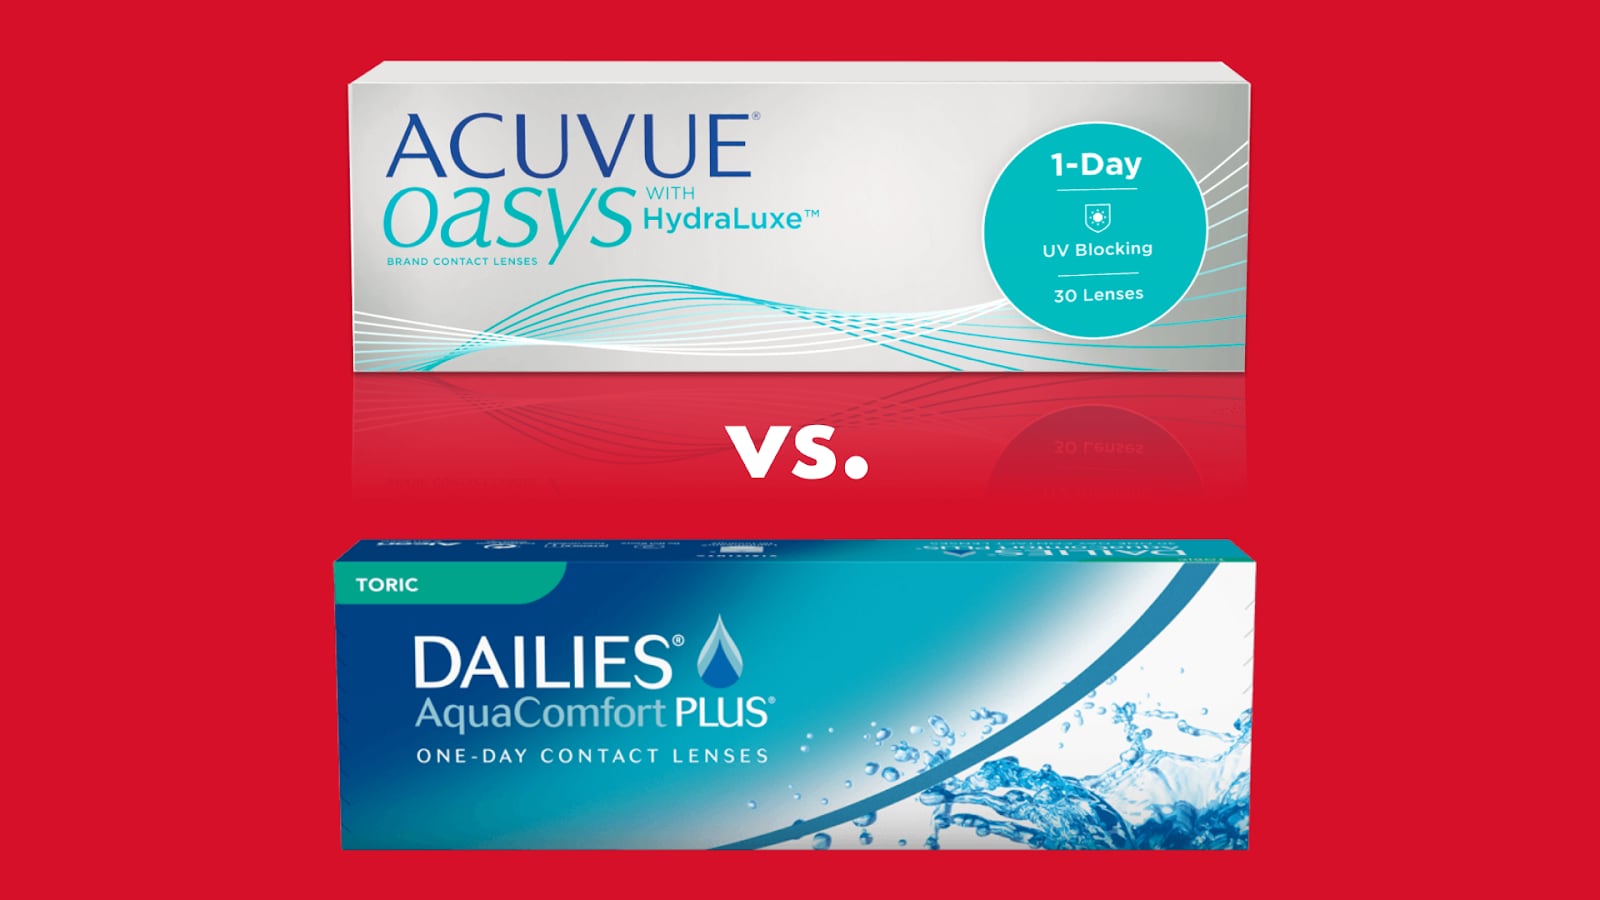 Acuvue vs alcon amerigroup over the counter benefits